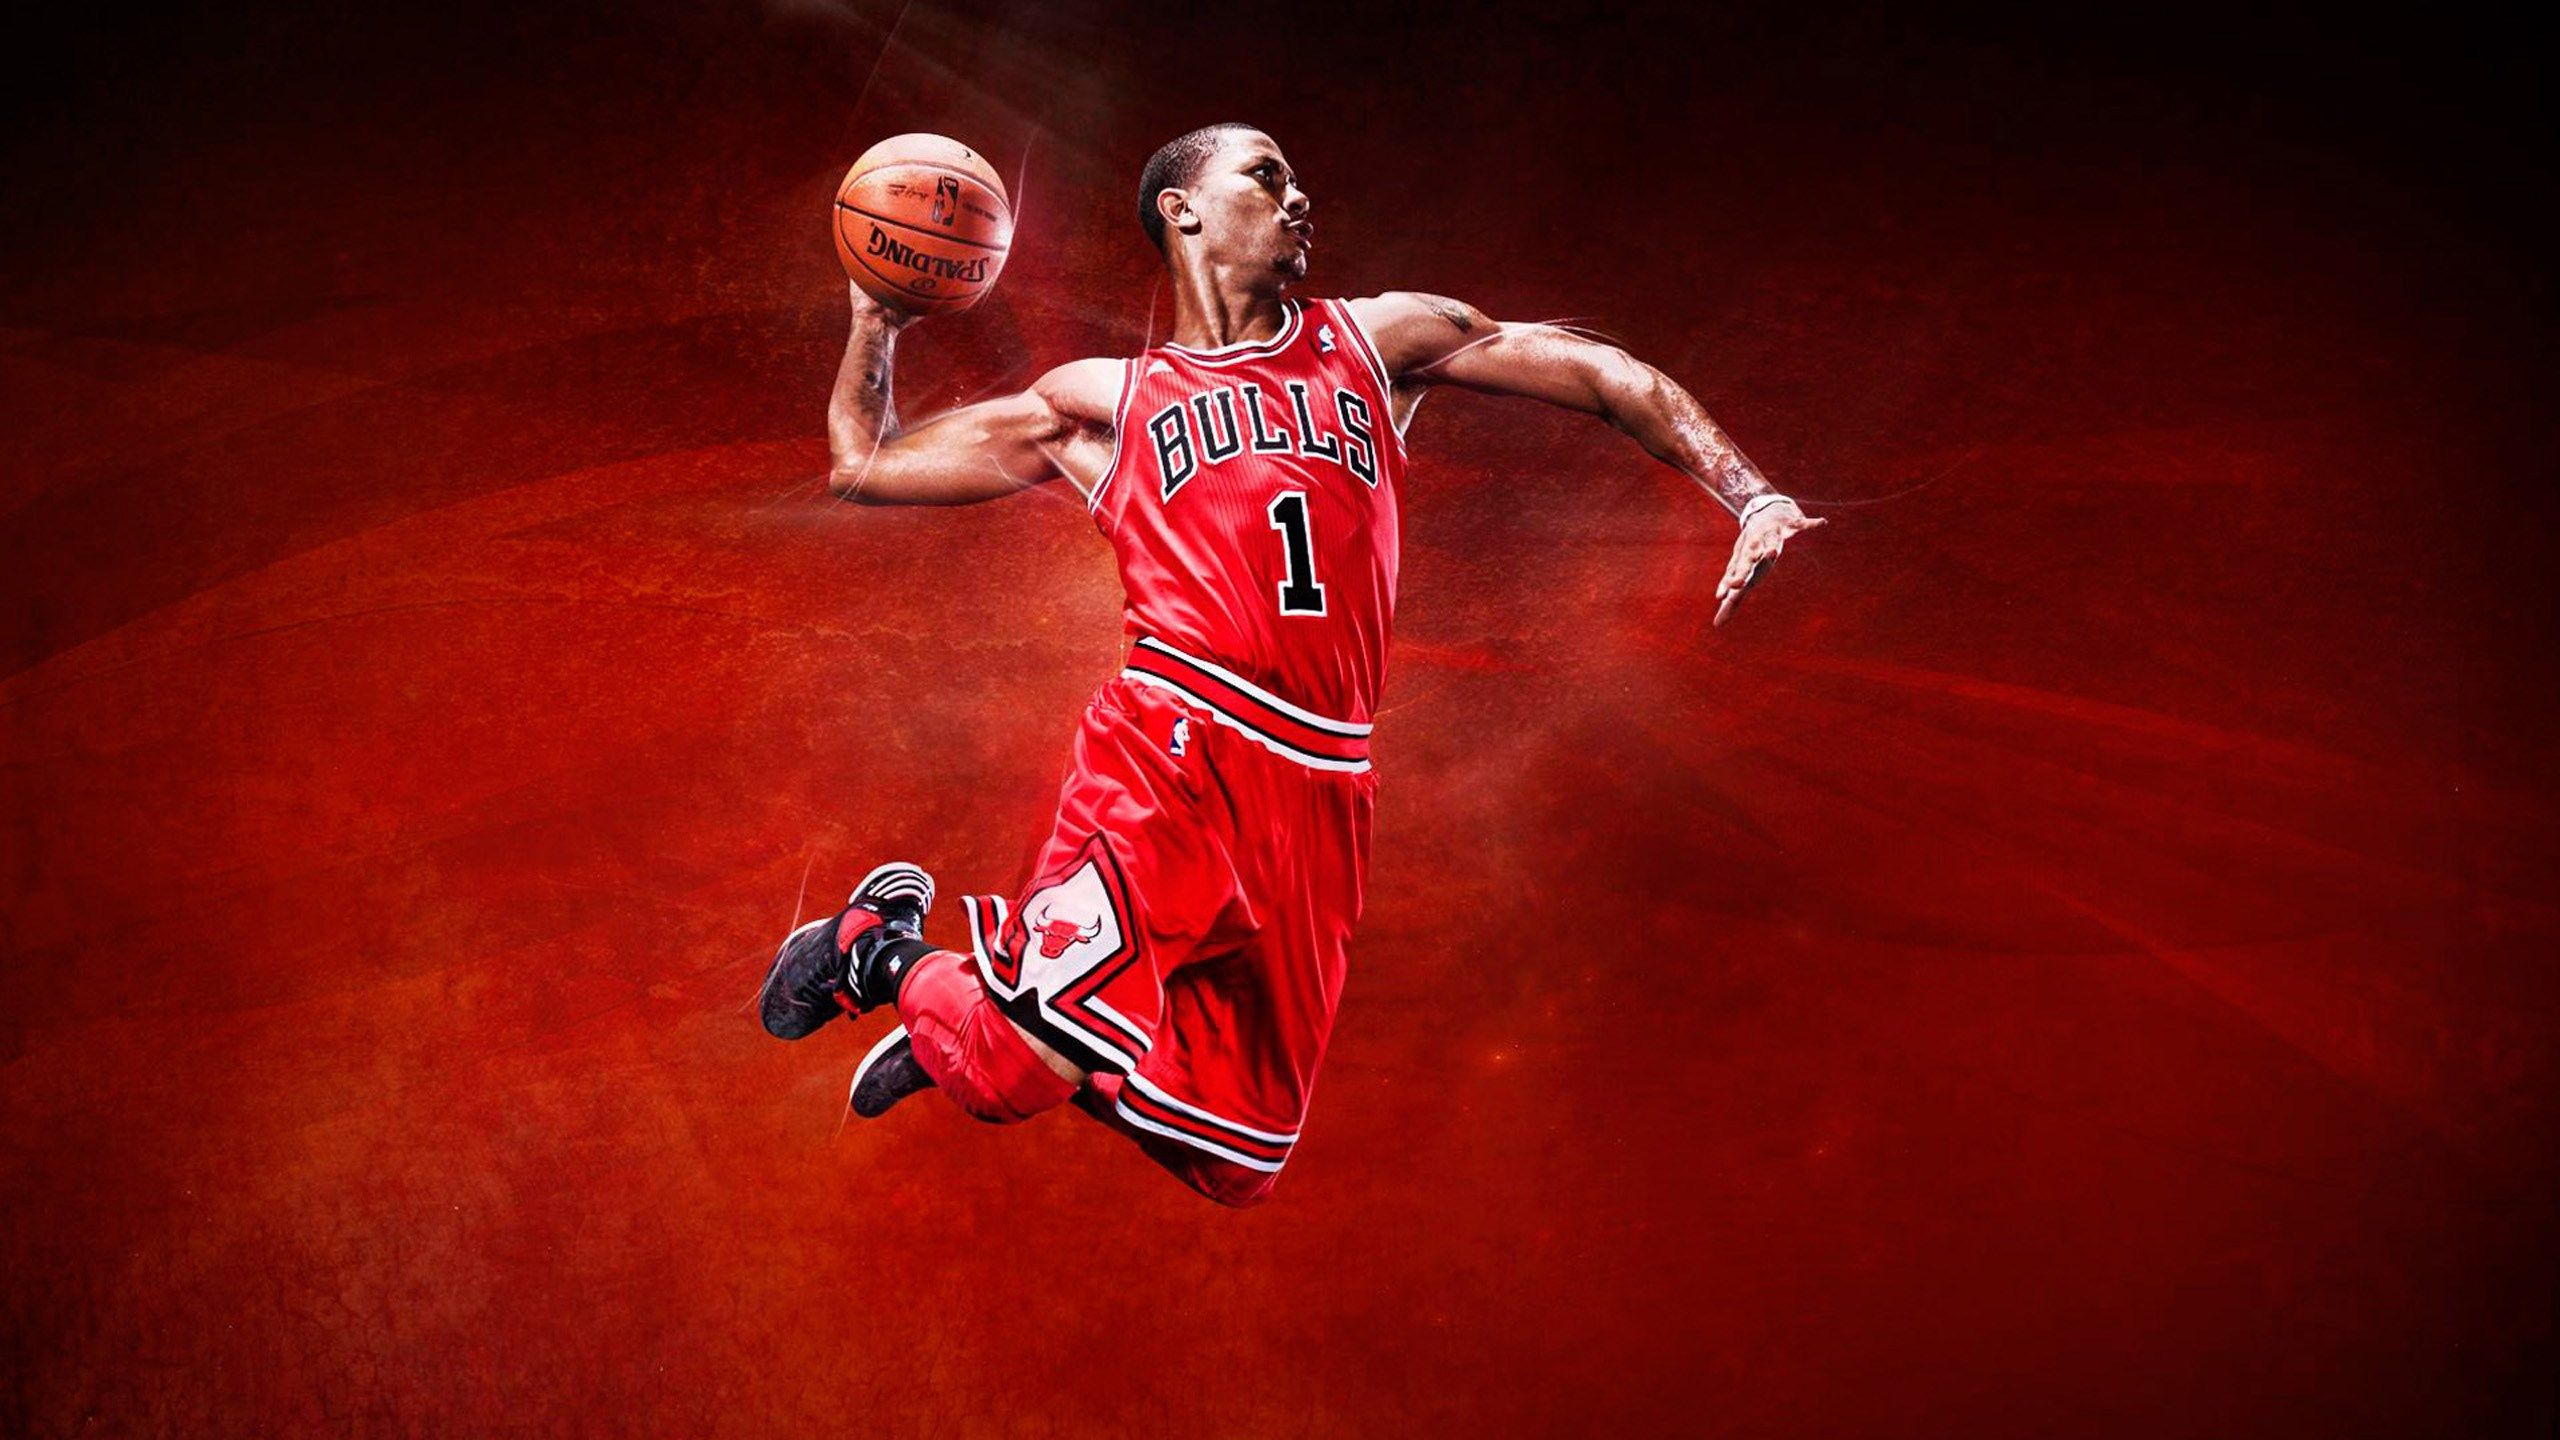 Red Basketball Wallpapers